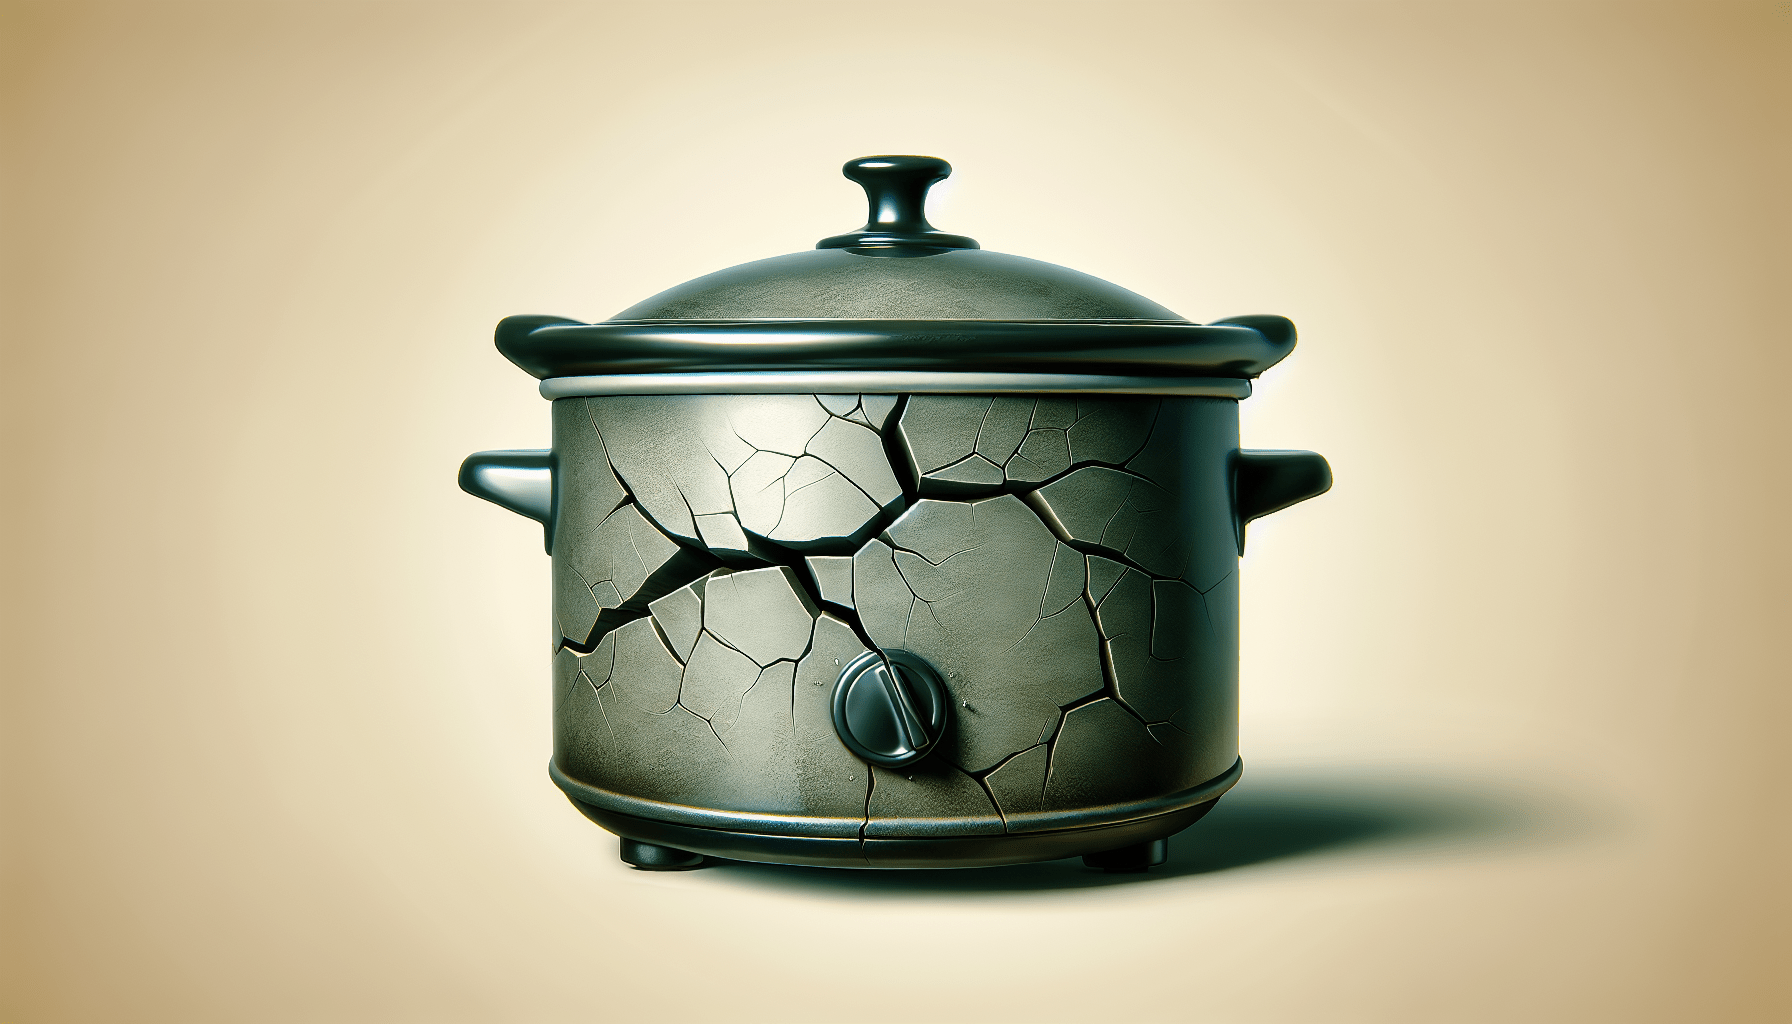 What Are The Disadvantages Of A Slow Cooker?